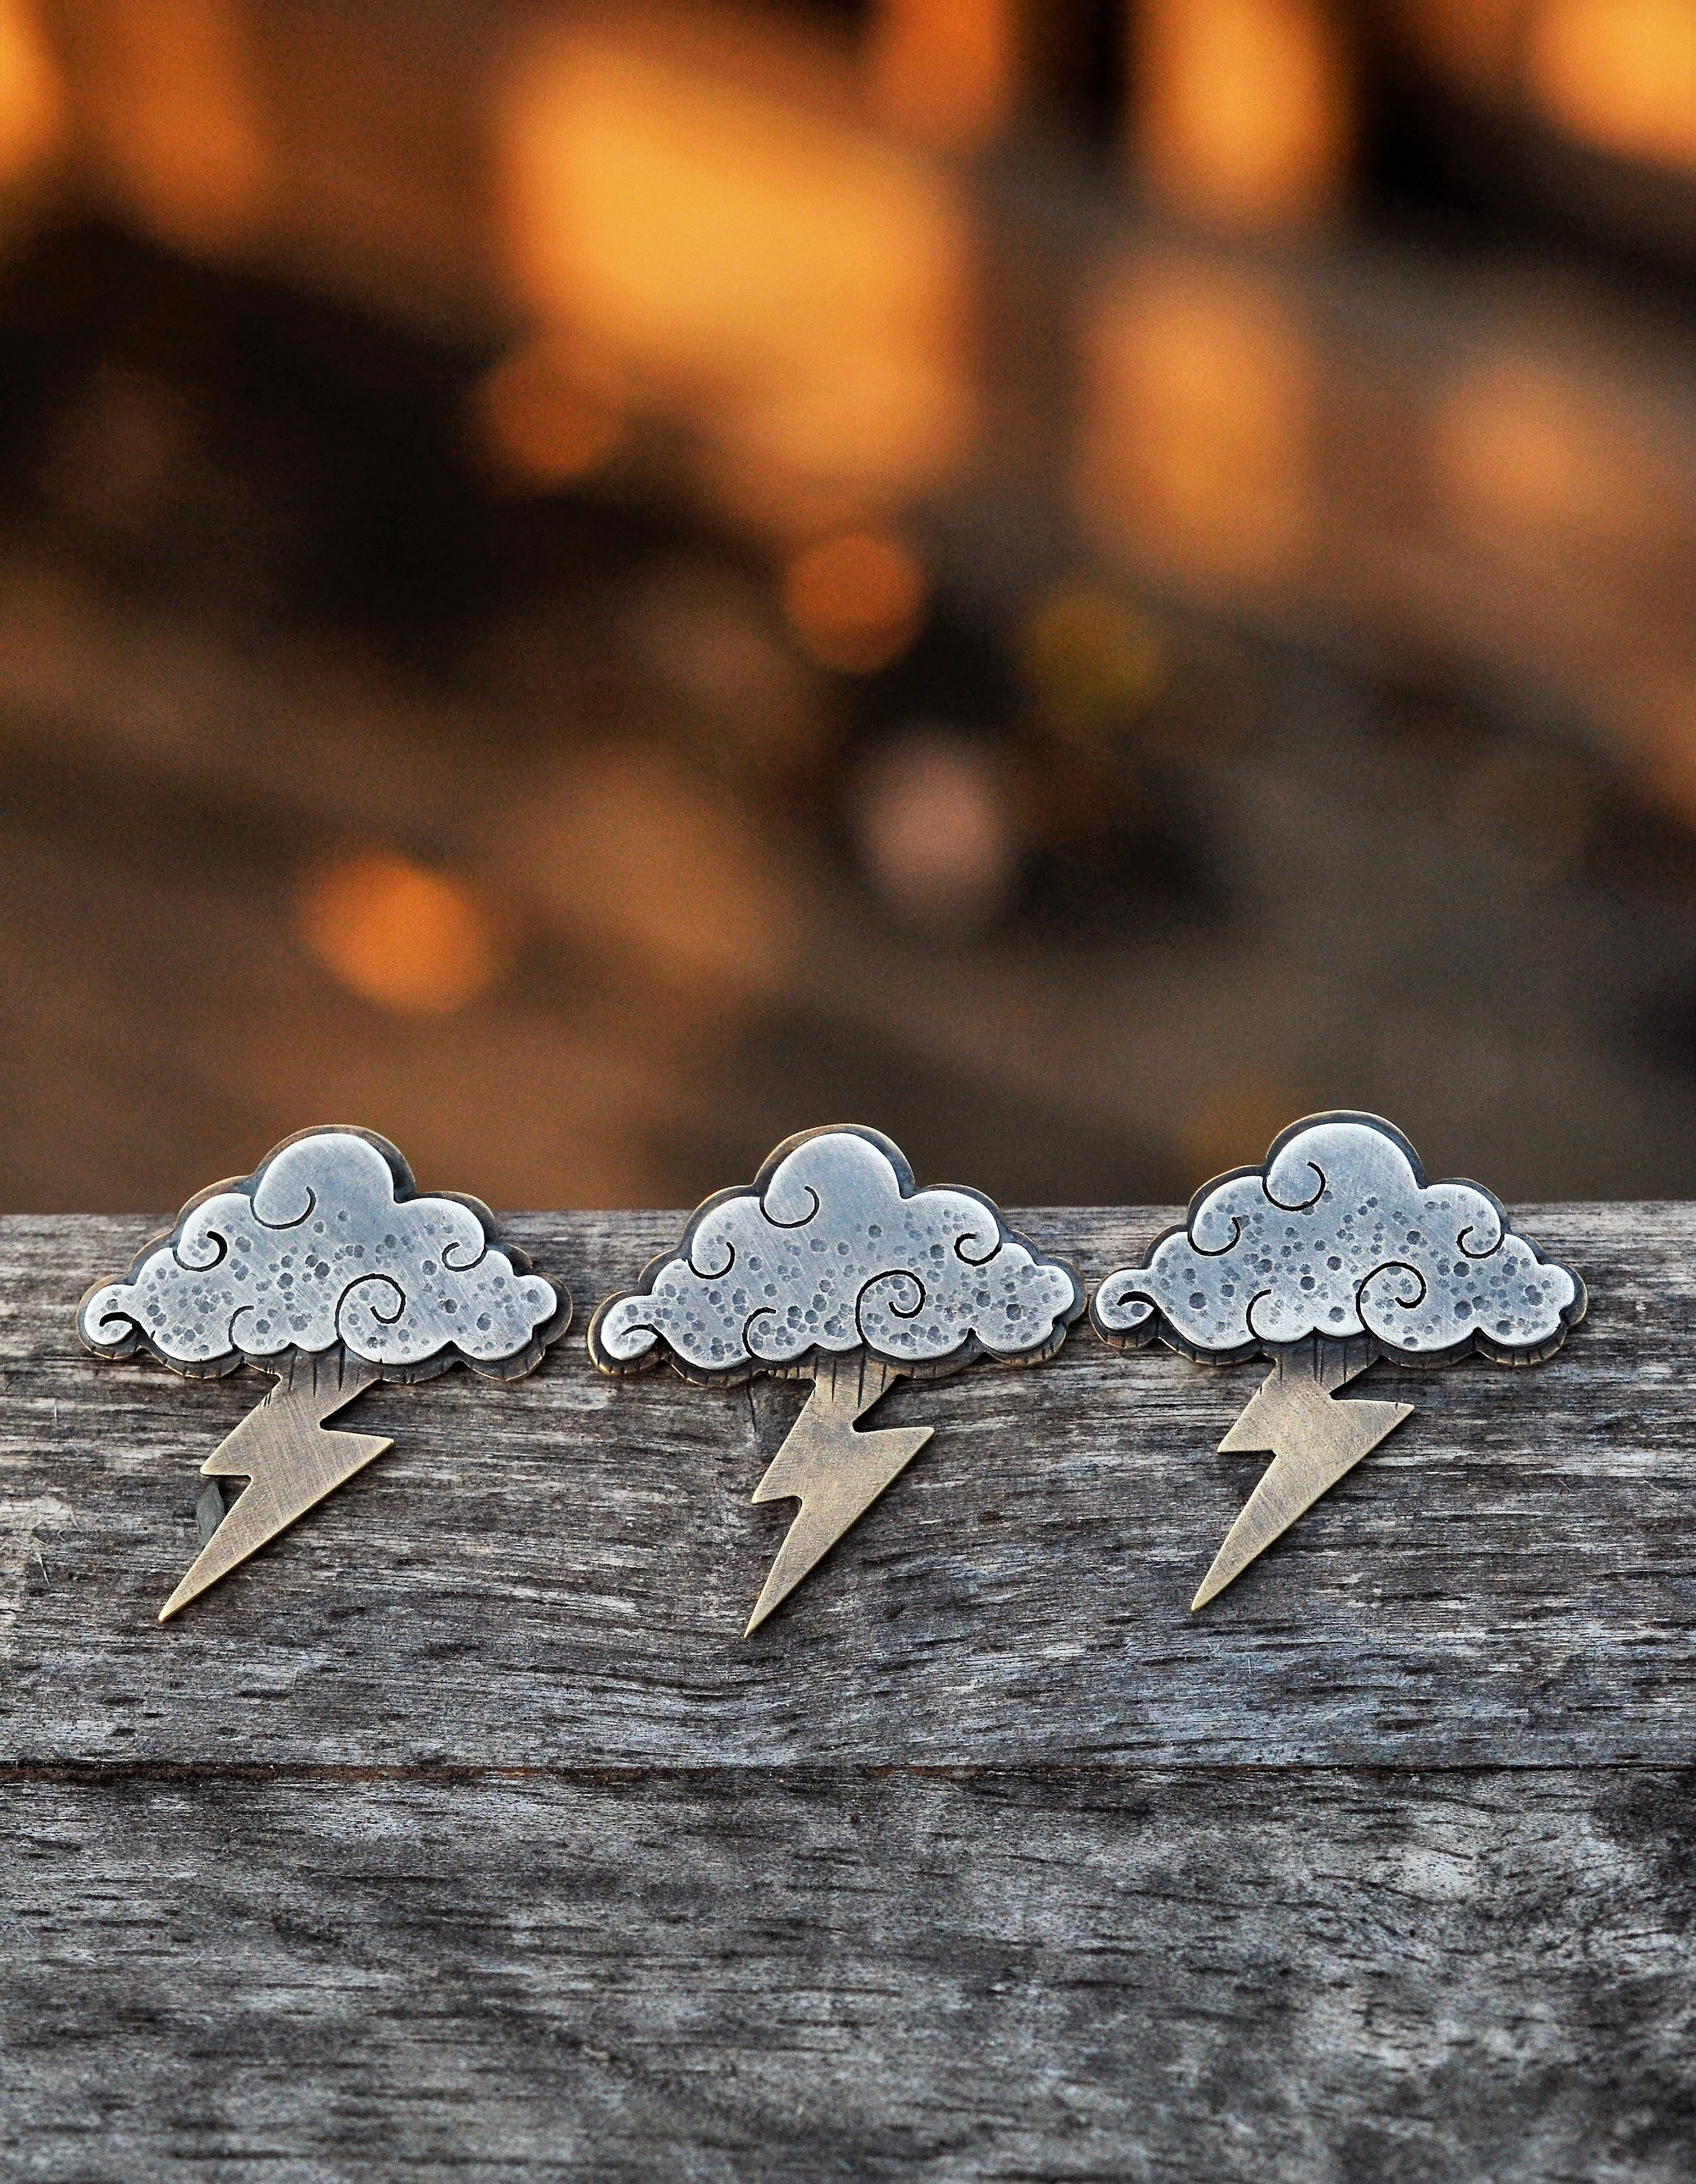 LOW STOCK! PRE-ORDER - Tattoo Style Mixed Metal Storm Cloud Necklace - 16" or 18" Chain Included